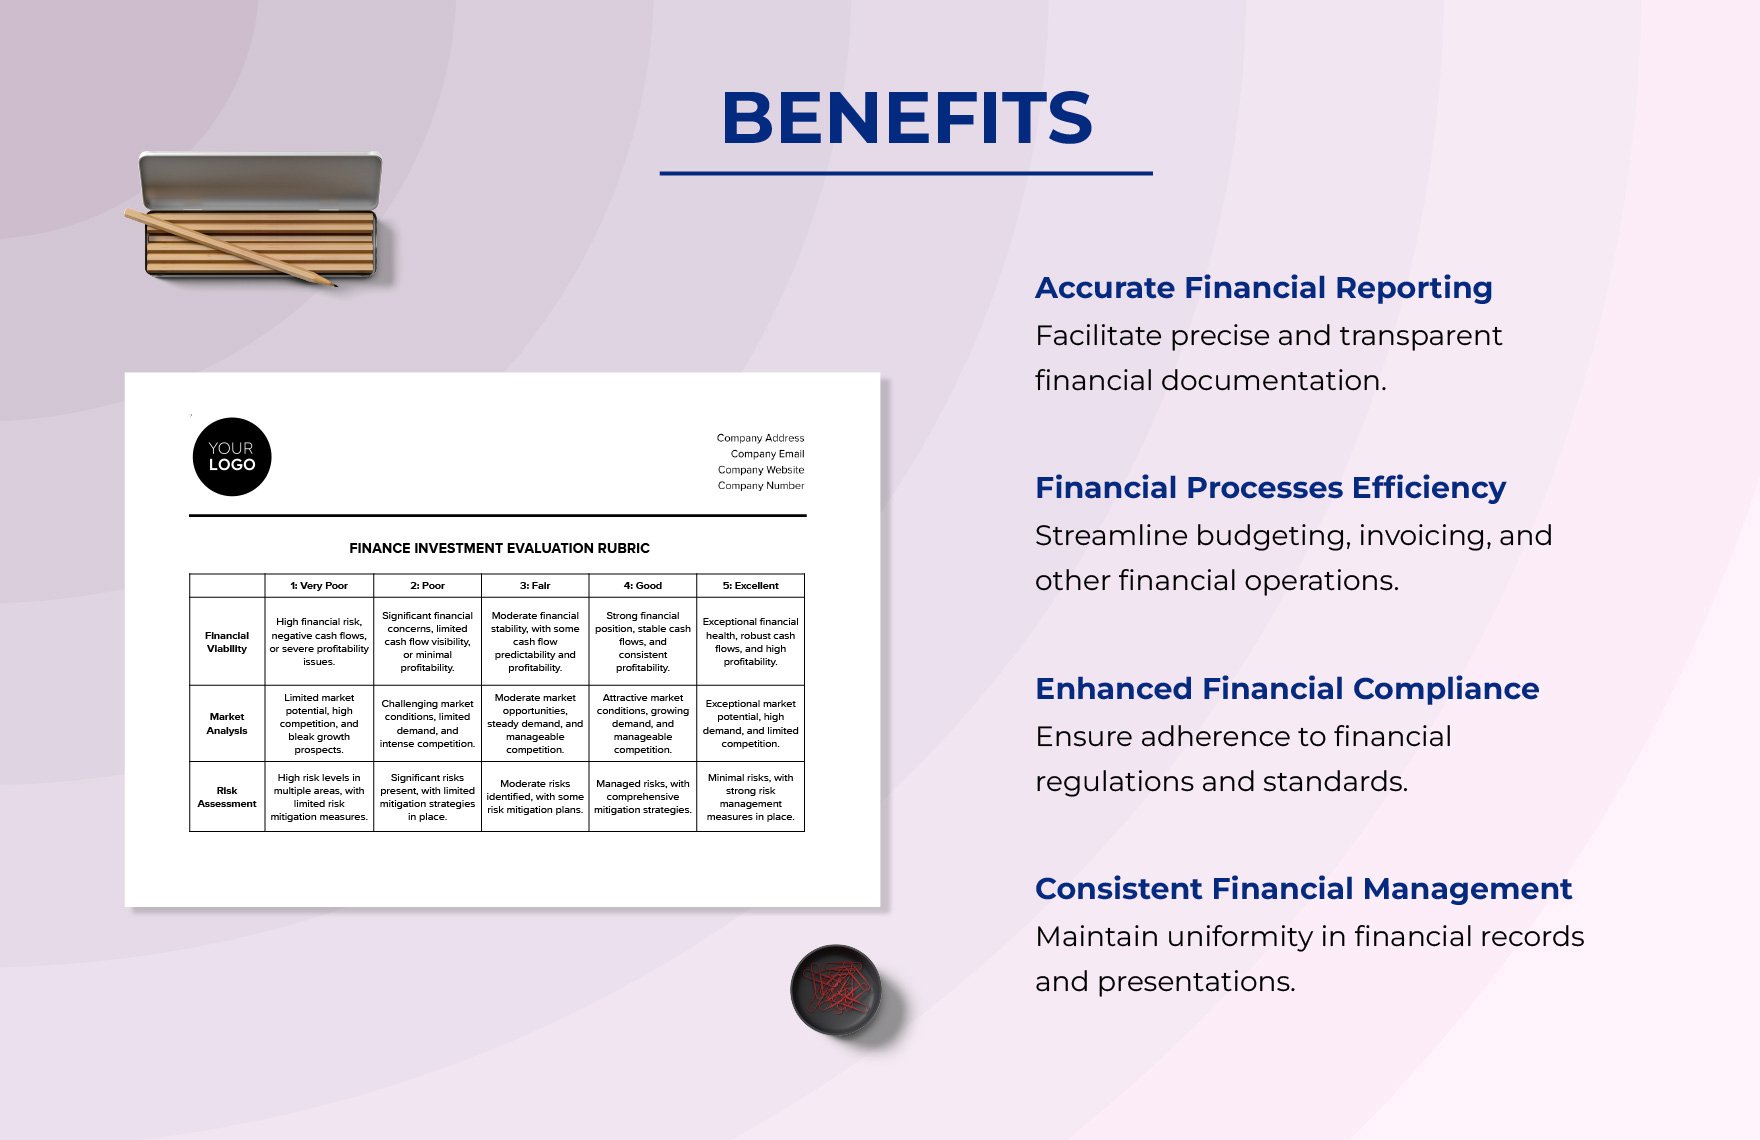 Finance Investment Evaluation Rubric Template